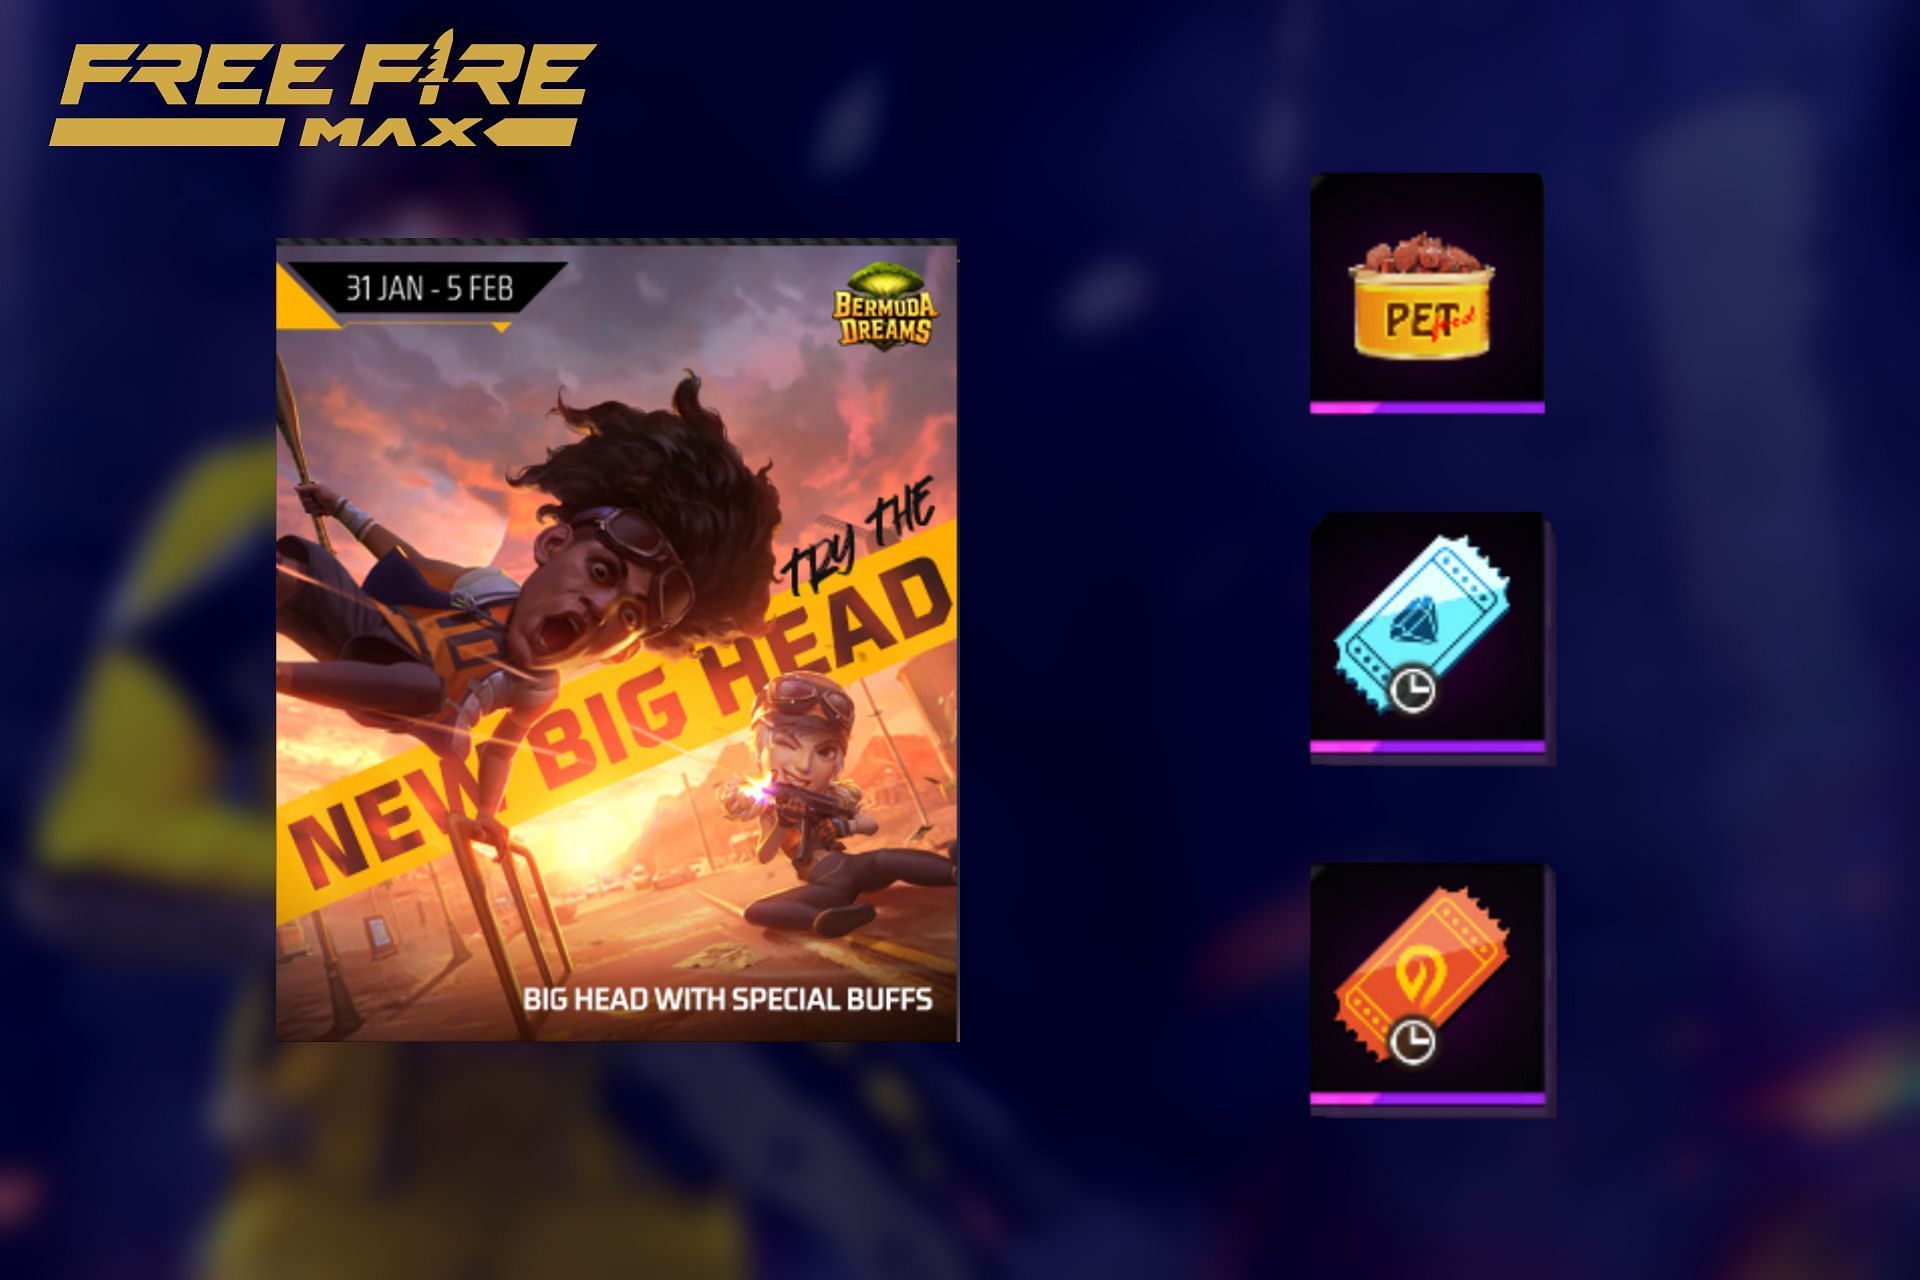 A new event has been added to Free Fire MAX recently (Image via Sportskeeda)